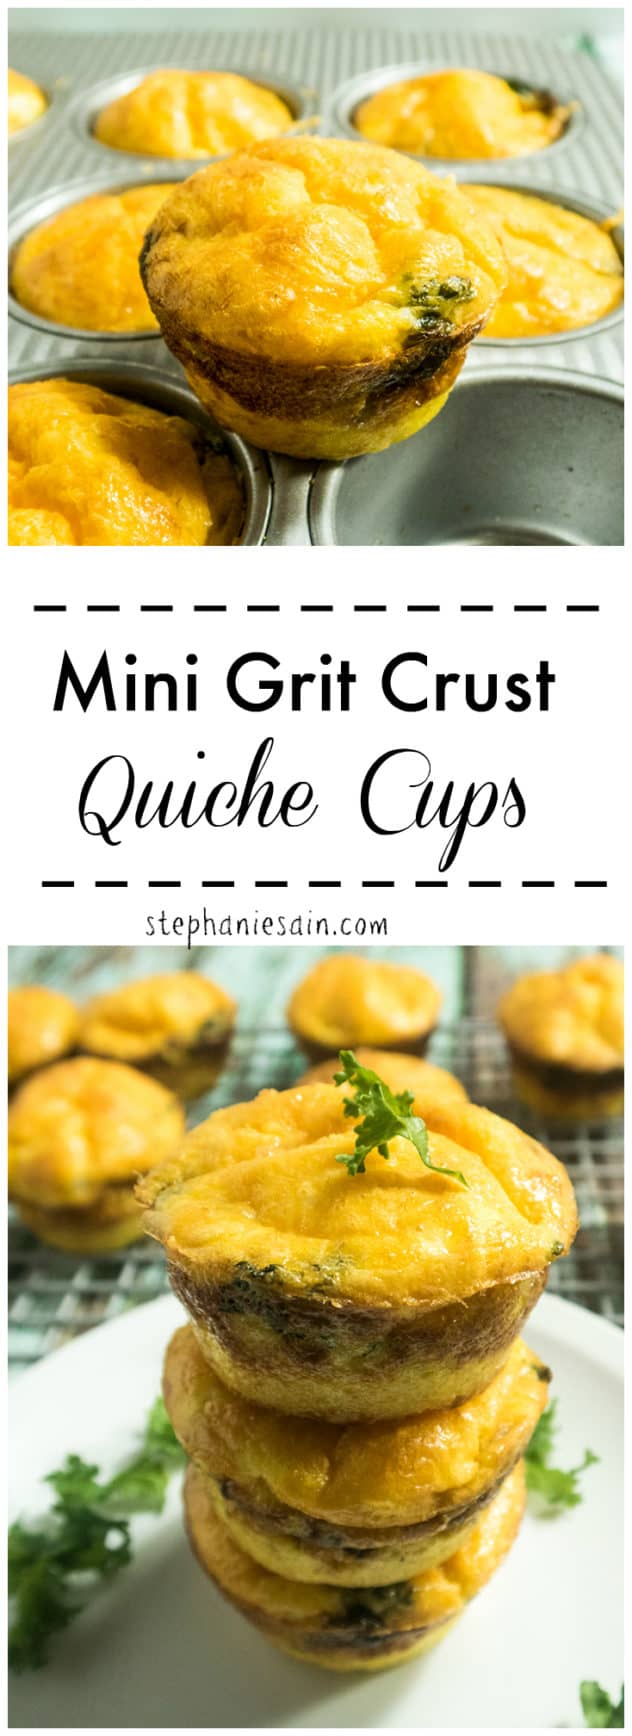 Mini Grit Crust Quiche Cups are a tasty, healthy grab and go breakfast. They can be customized with all of your favorite fillings. Gluten Free & Vegetarian.